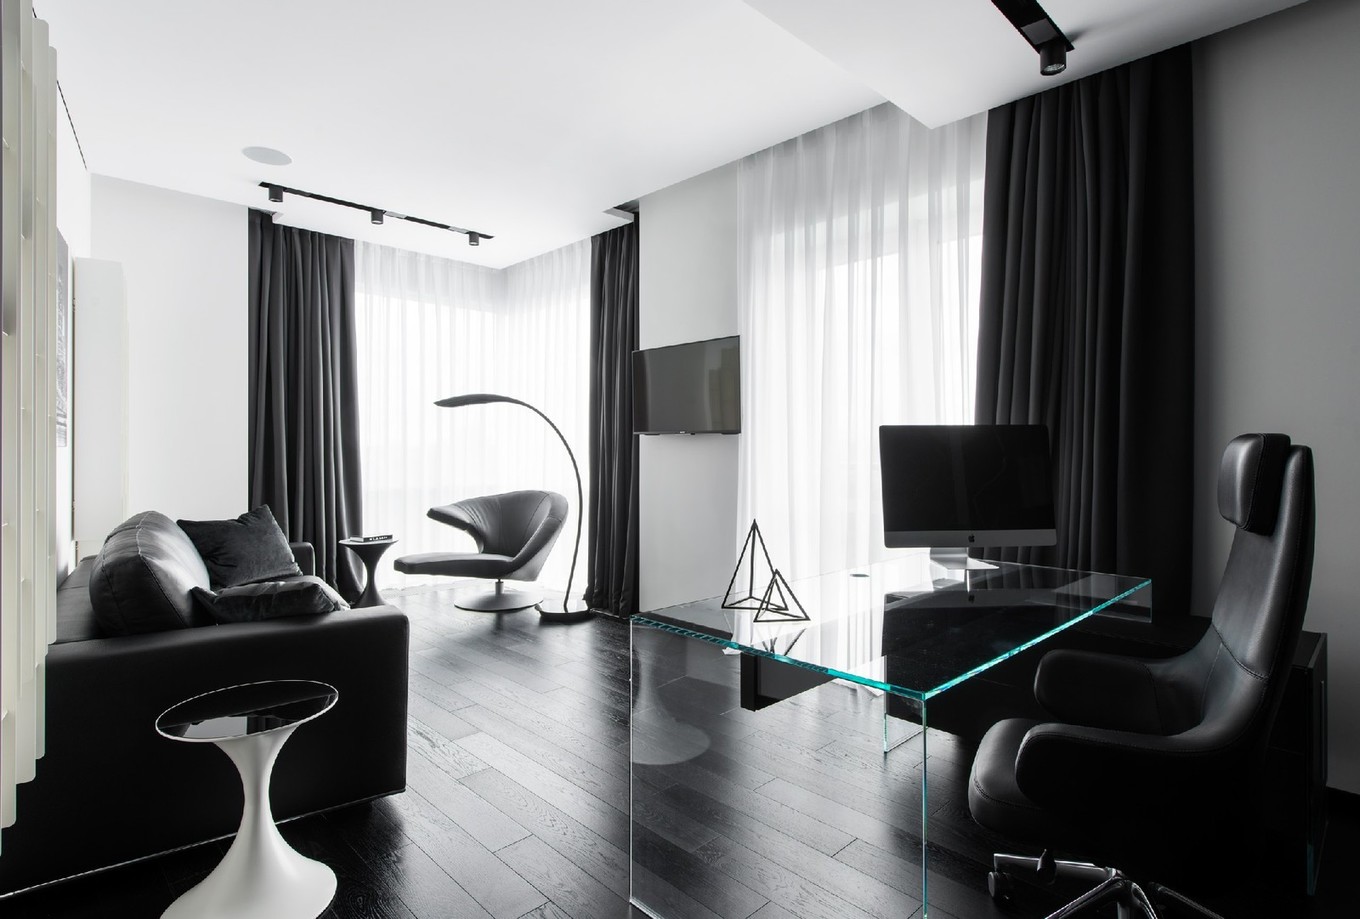 High-tech style in the interior